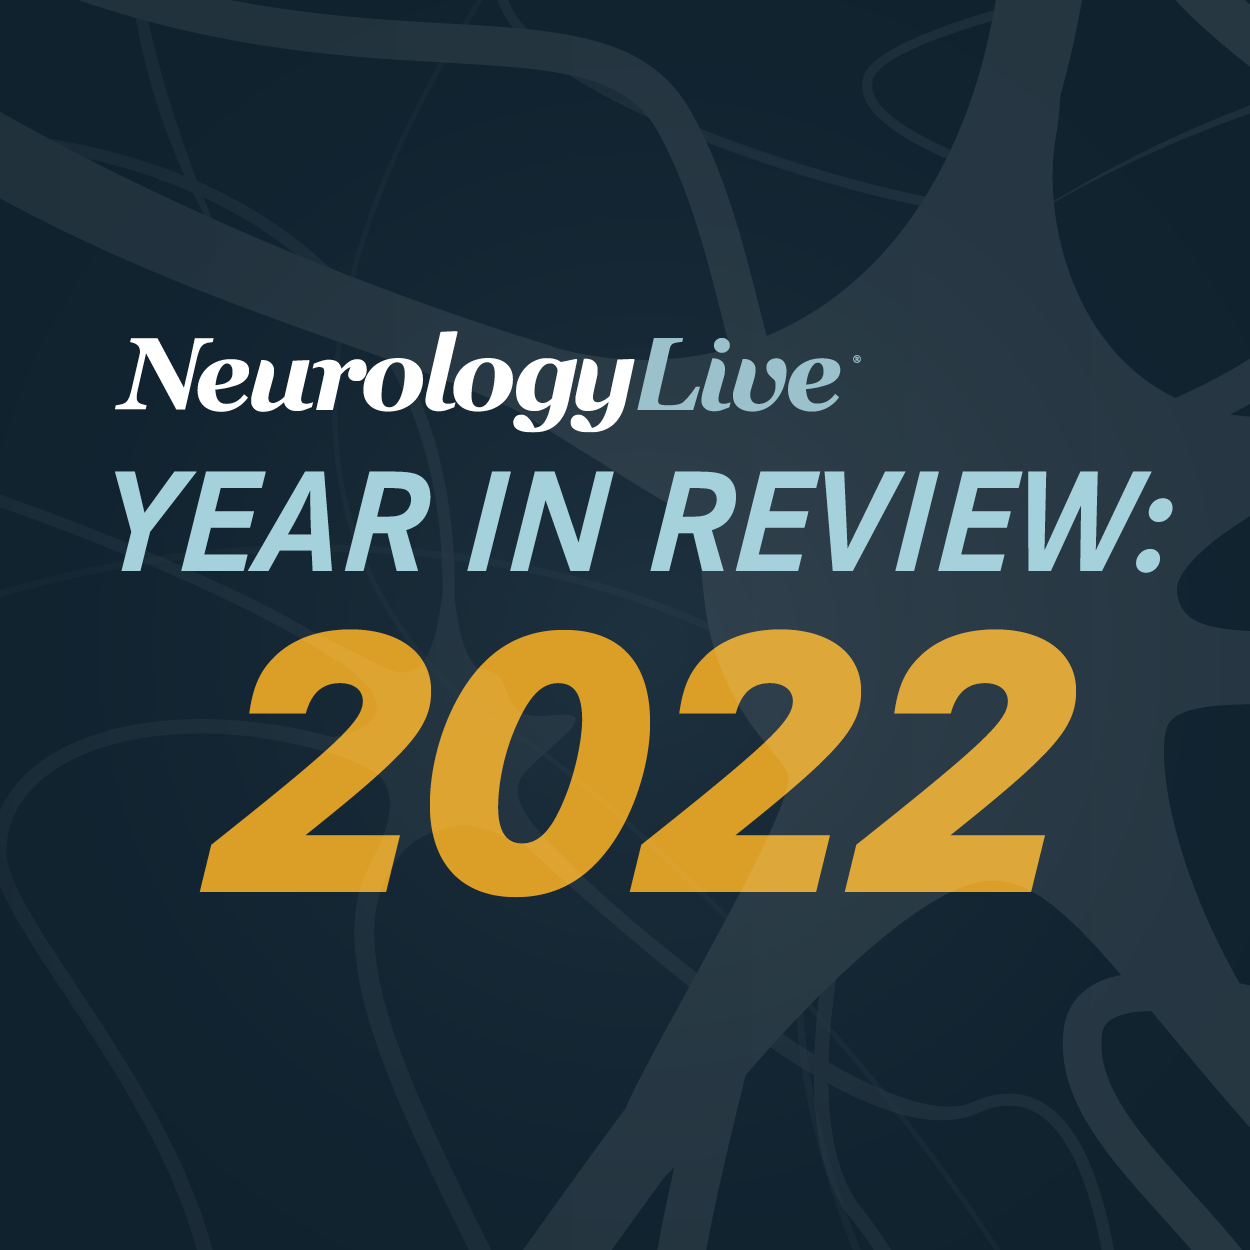 NeurologyLive® Year in Review 2022: Most-Watched Epilepsy Expert Interviews